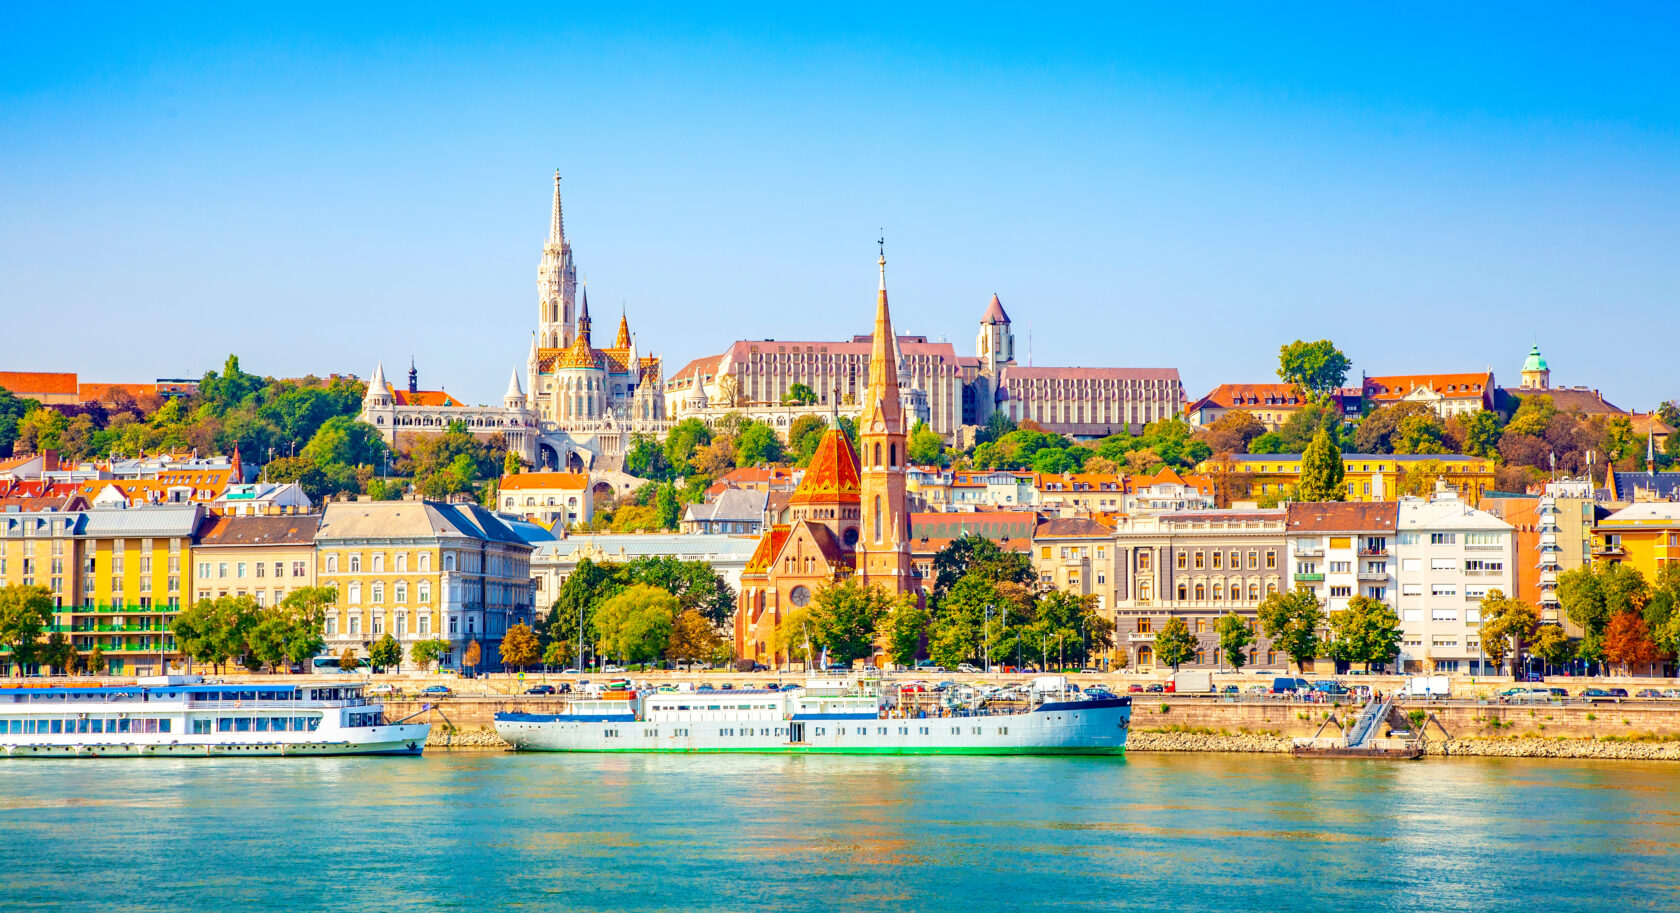 A view of the Budapest skyline from the Danube river (an Atlantis site).